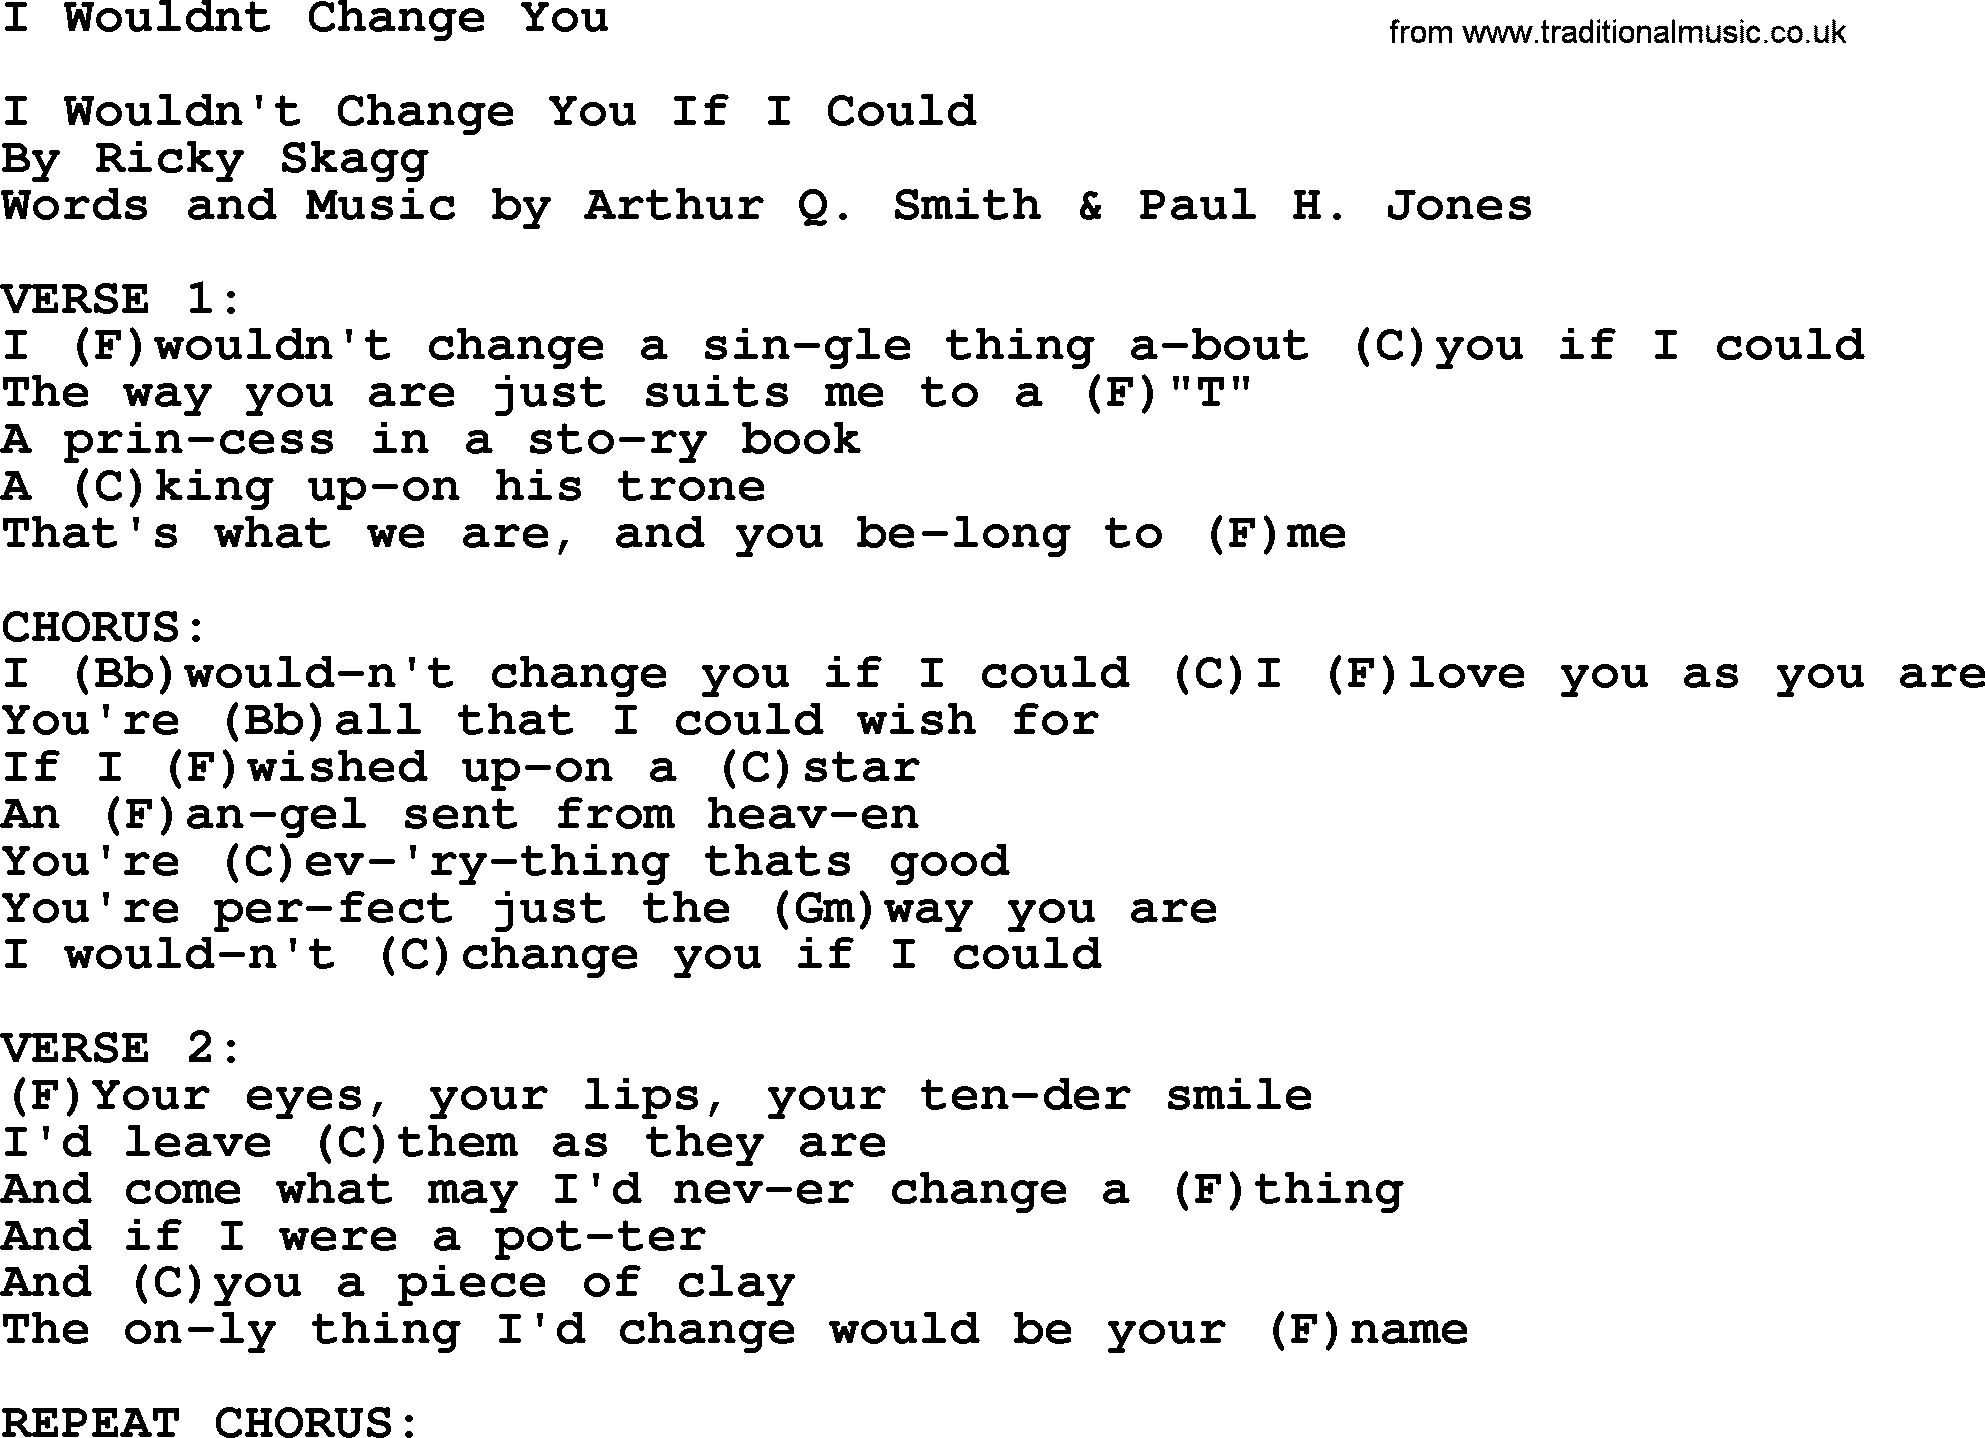 Bluegrass song: I Wouldnt Change You, lyrics and chords